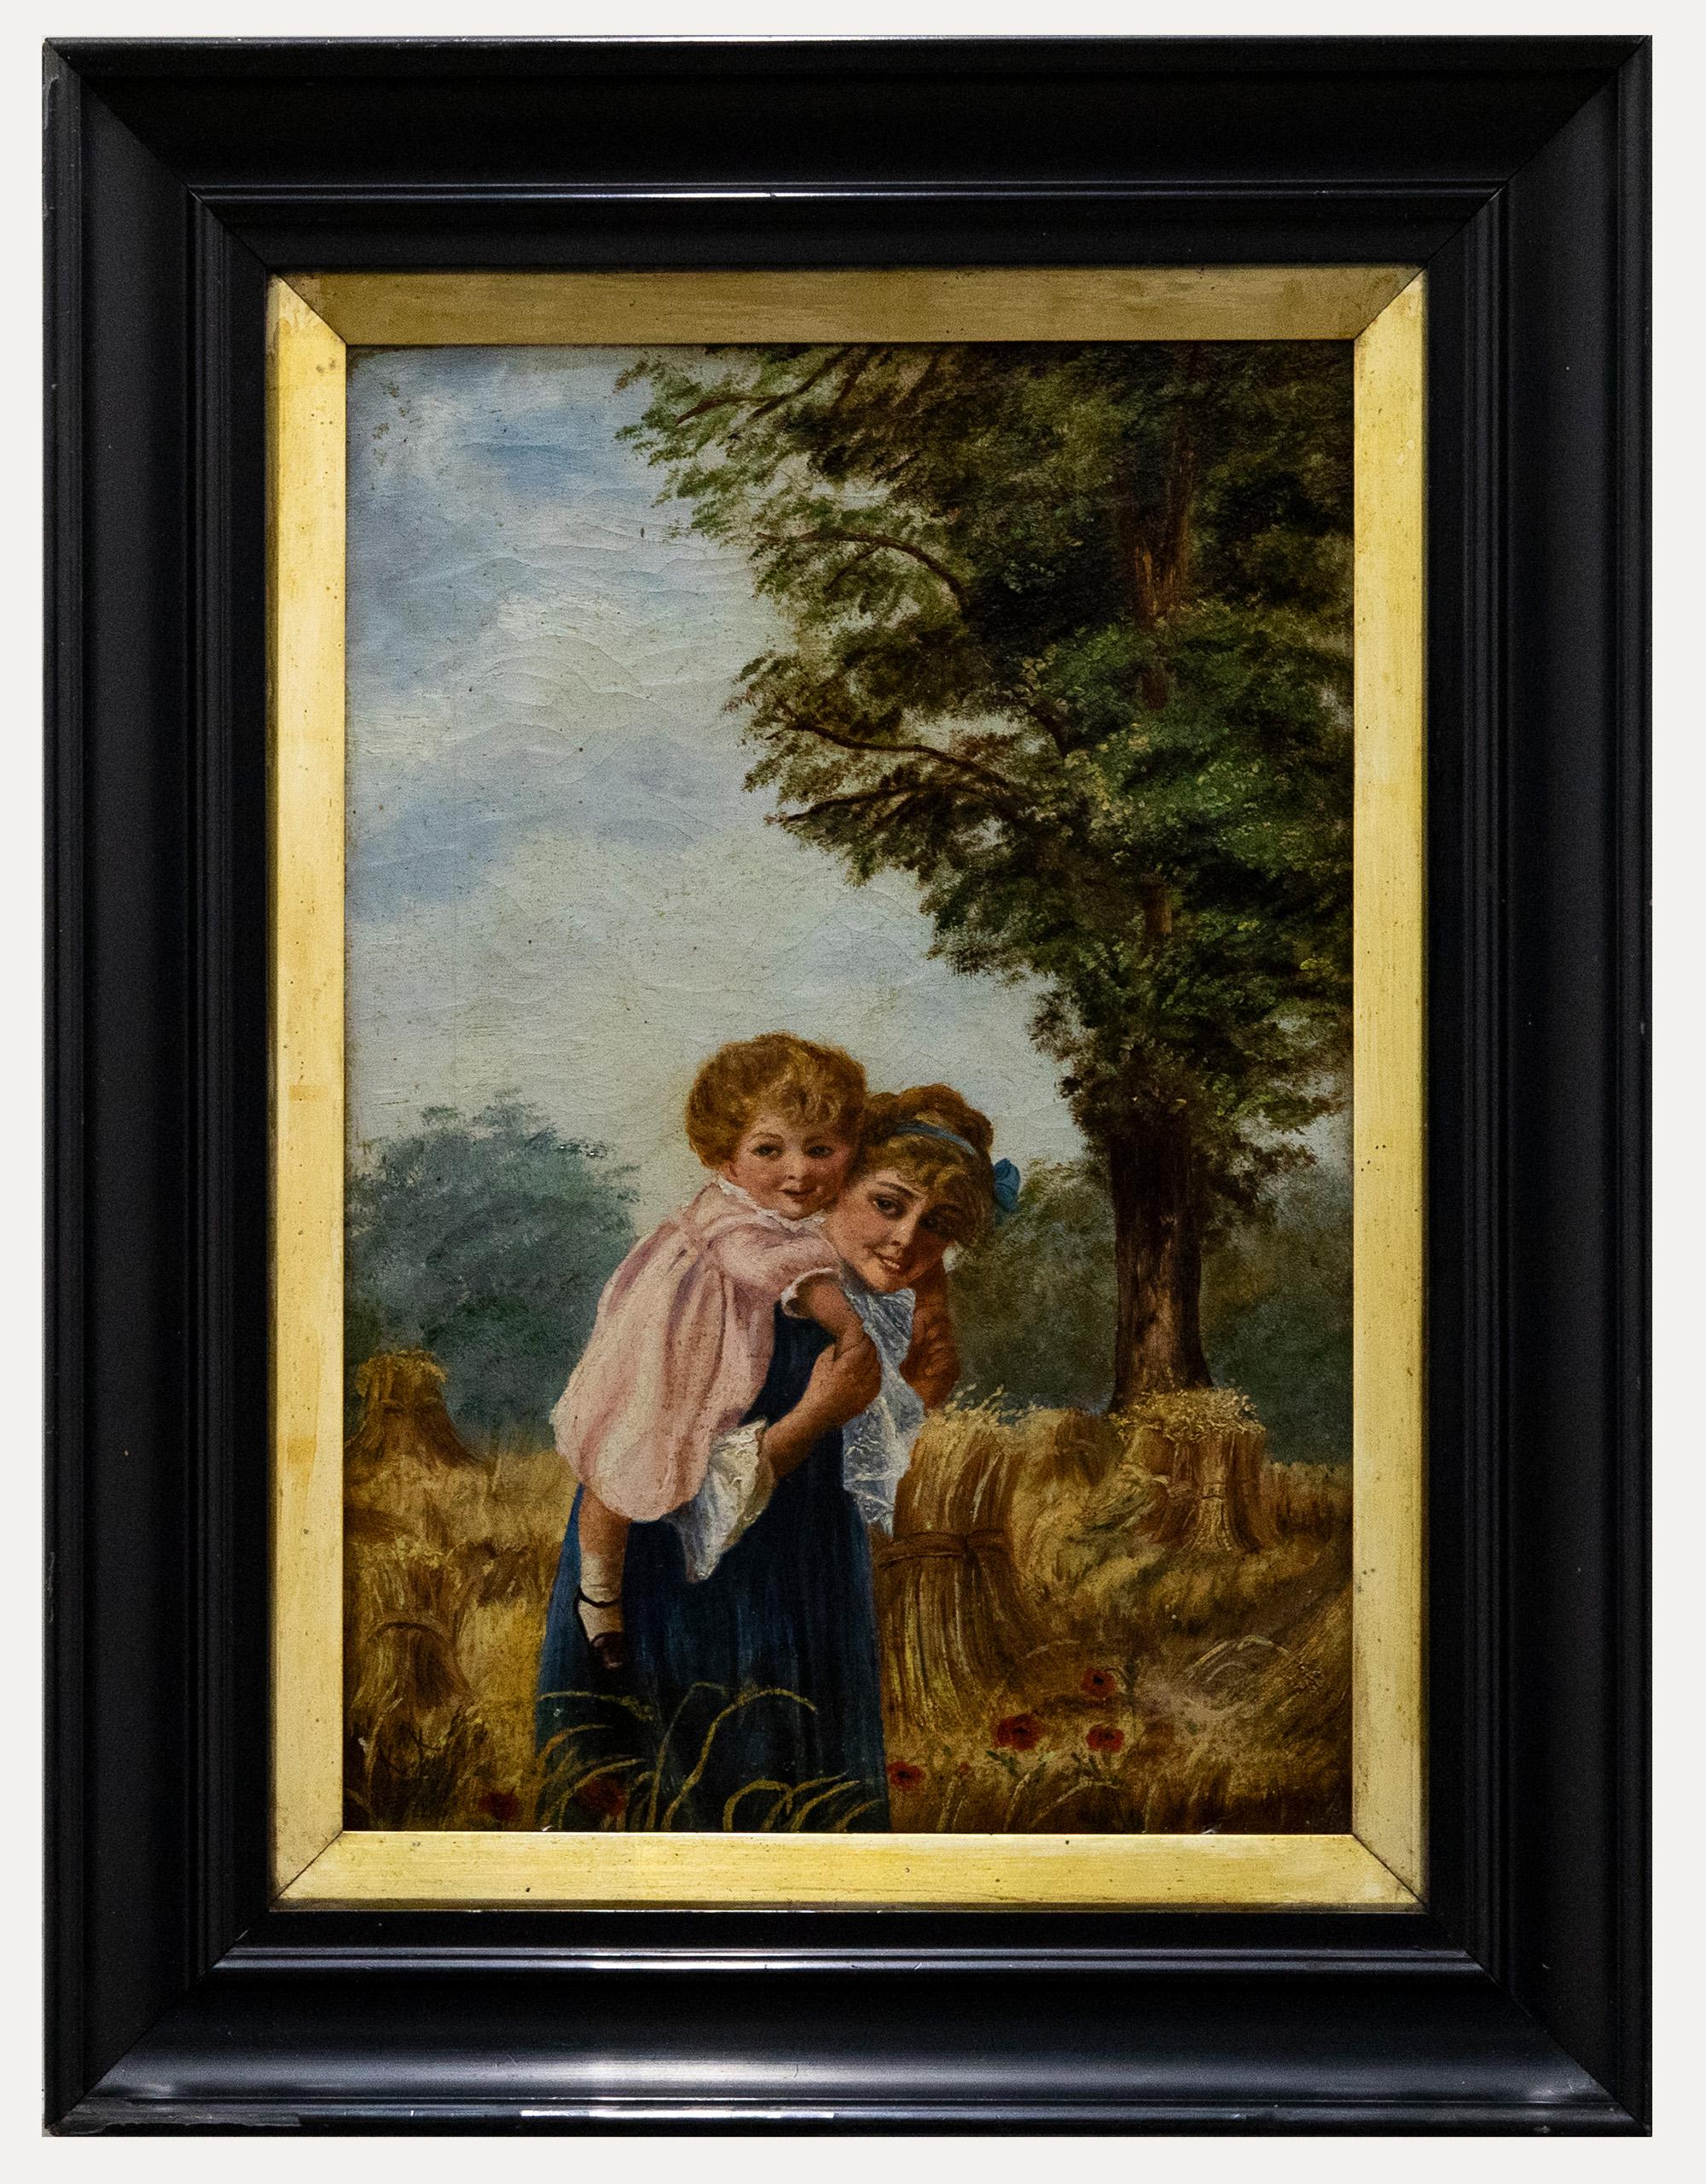 Unknown Figurative Painting - K.K - Framed 19th Century Oil, In the Wheat Fields